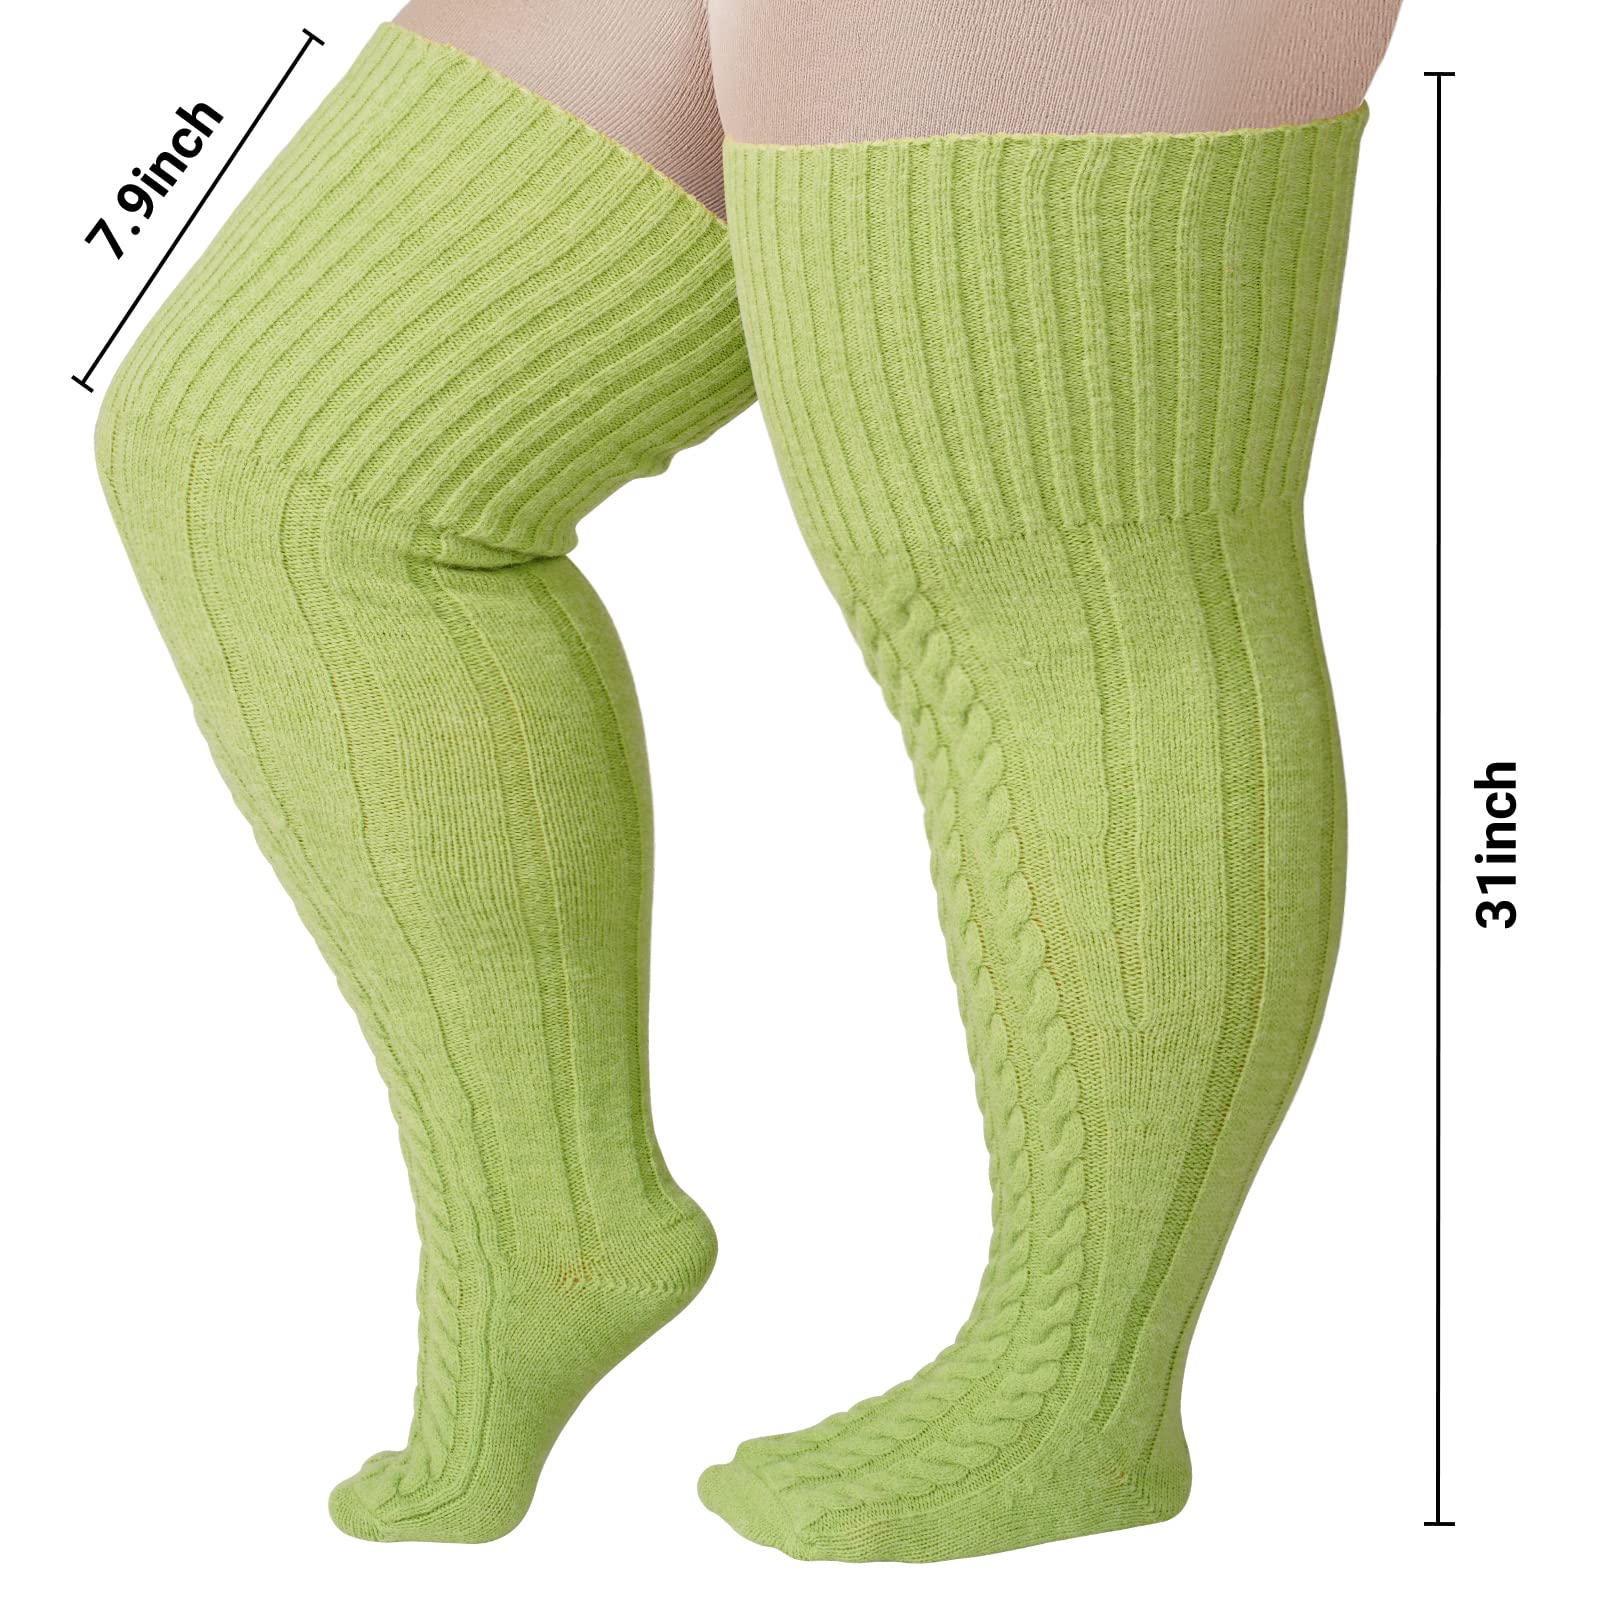 Wool Plus Size Thigh High Socks For Thick Thighs-Avocado Green - Moon Wood